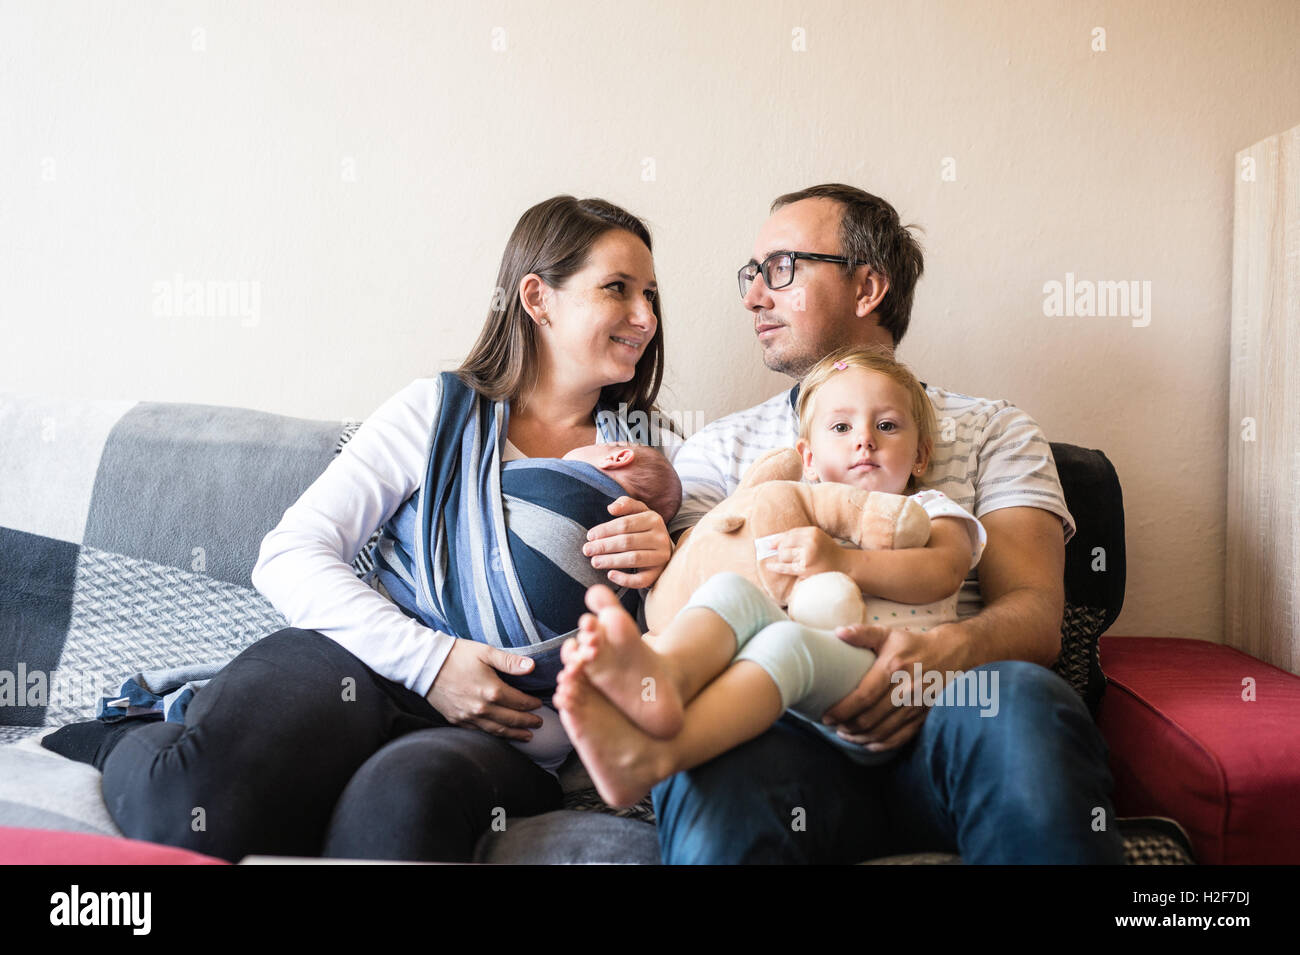 Young parents with children sittin on sofa, baby sling Stock Photo